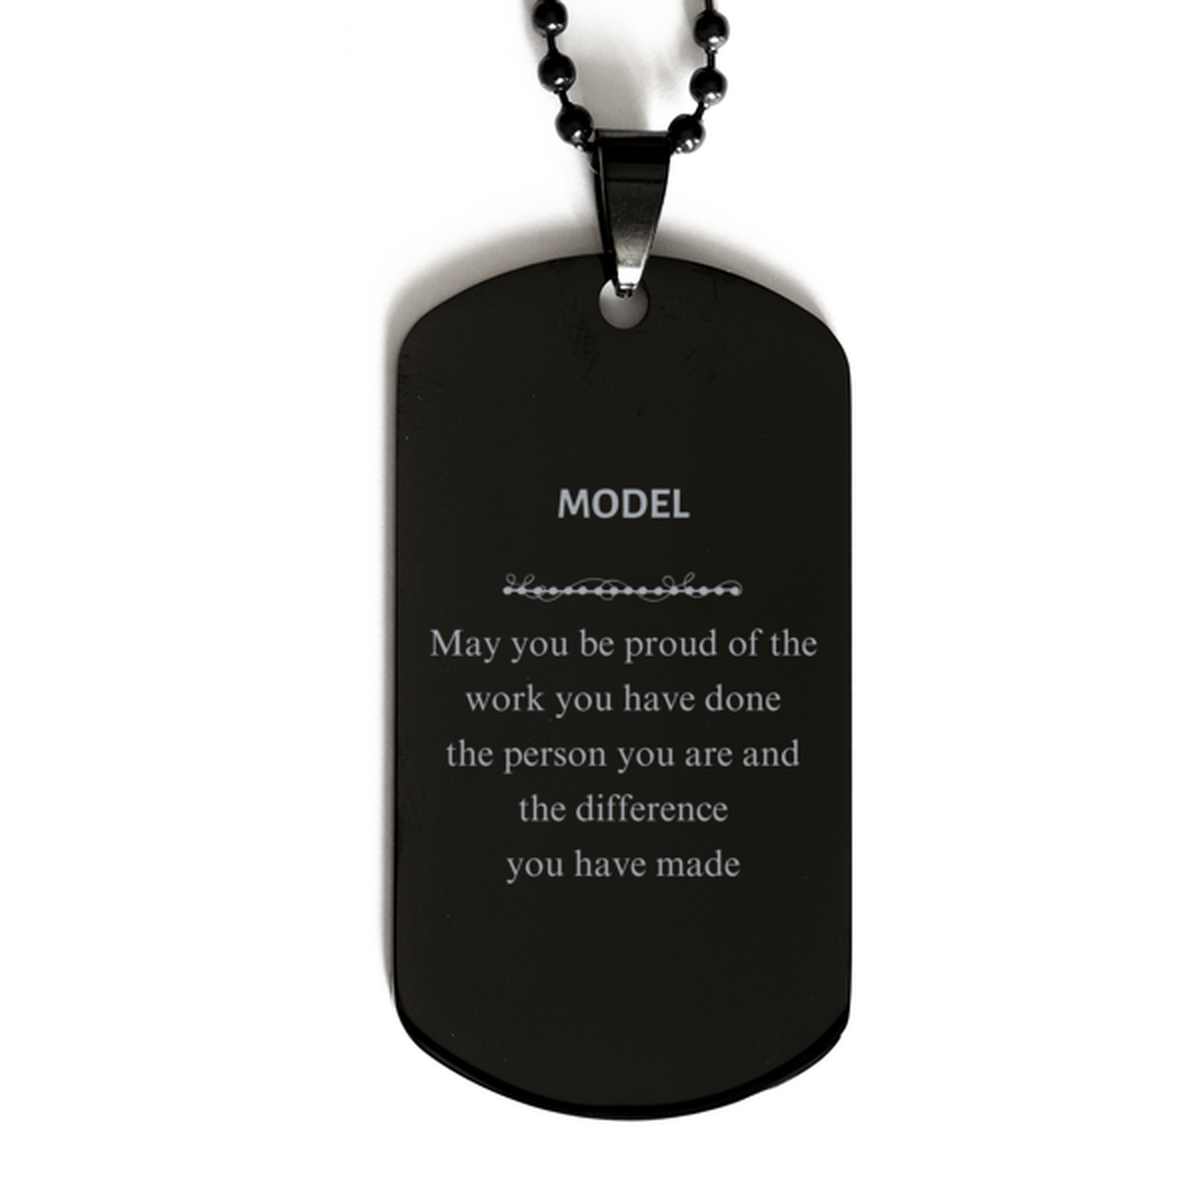 Model May you be proud of the work you have done, Retirement Model Black Dog Tag for Colleague Appreciation Gifts Amazing for Model